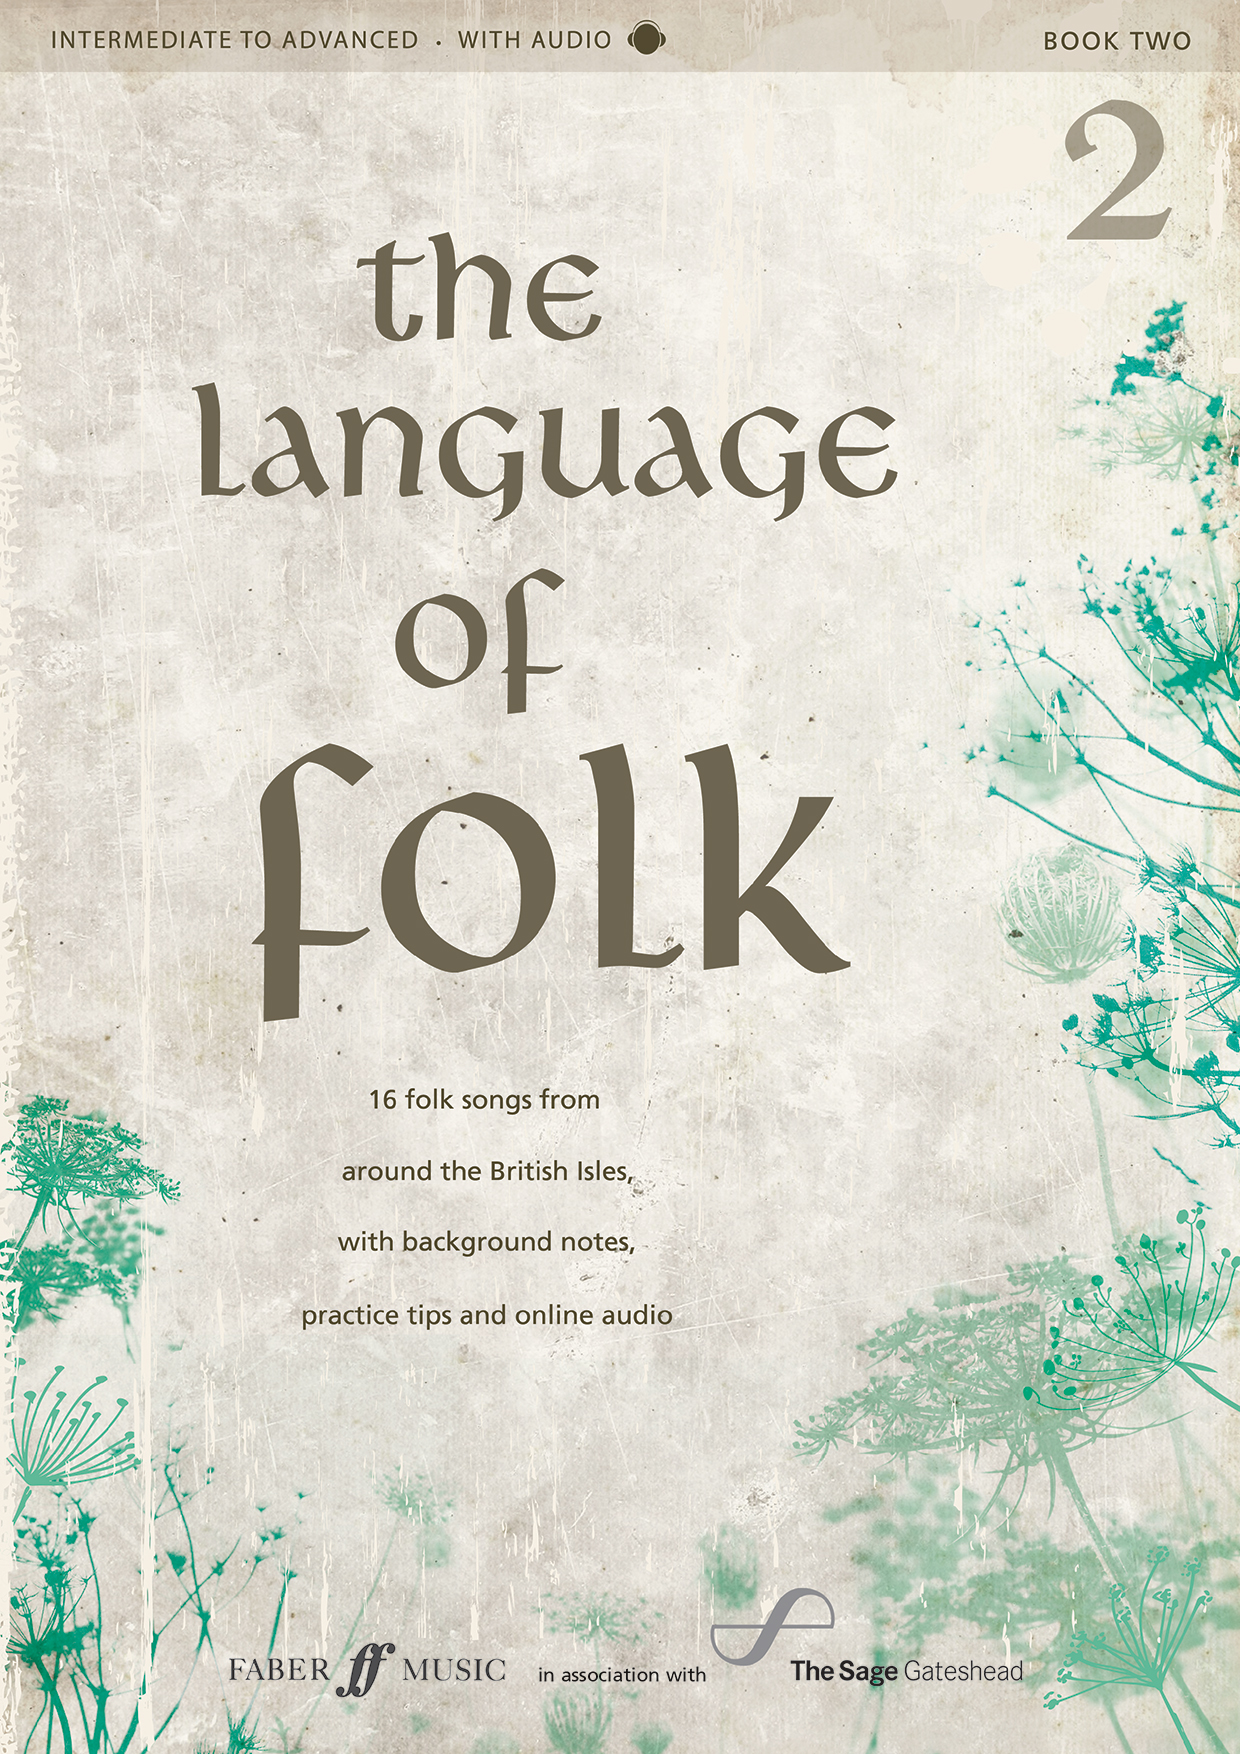 Folklore book Taylor.